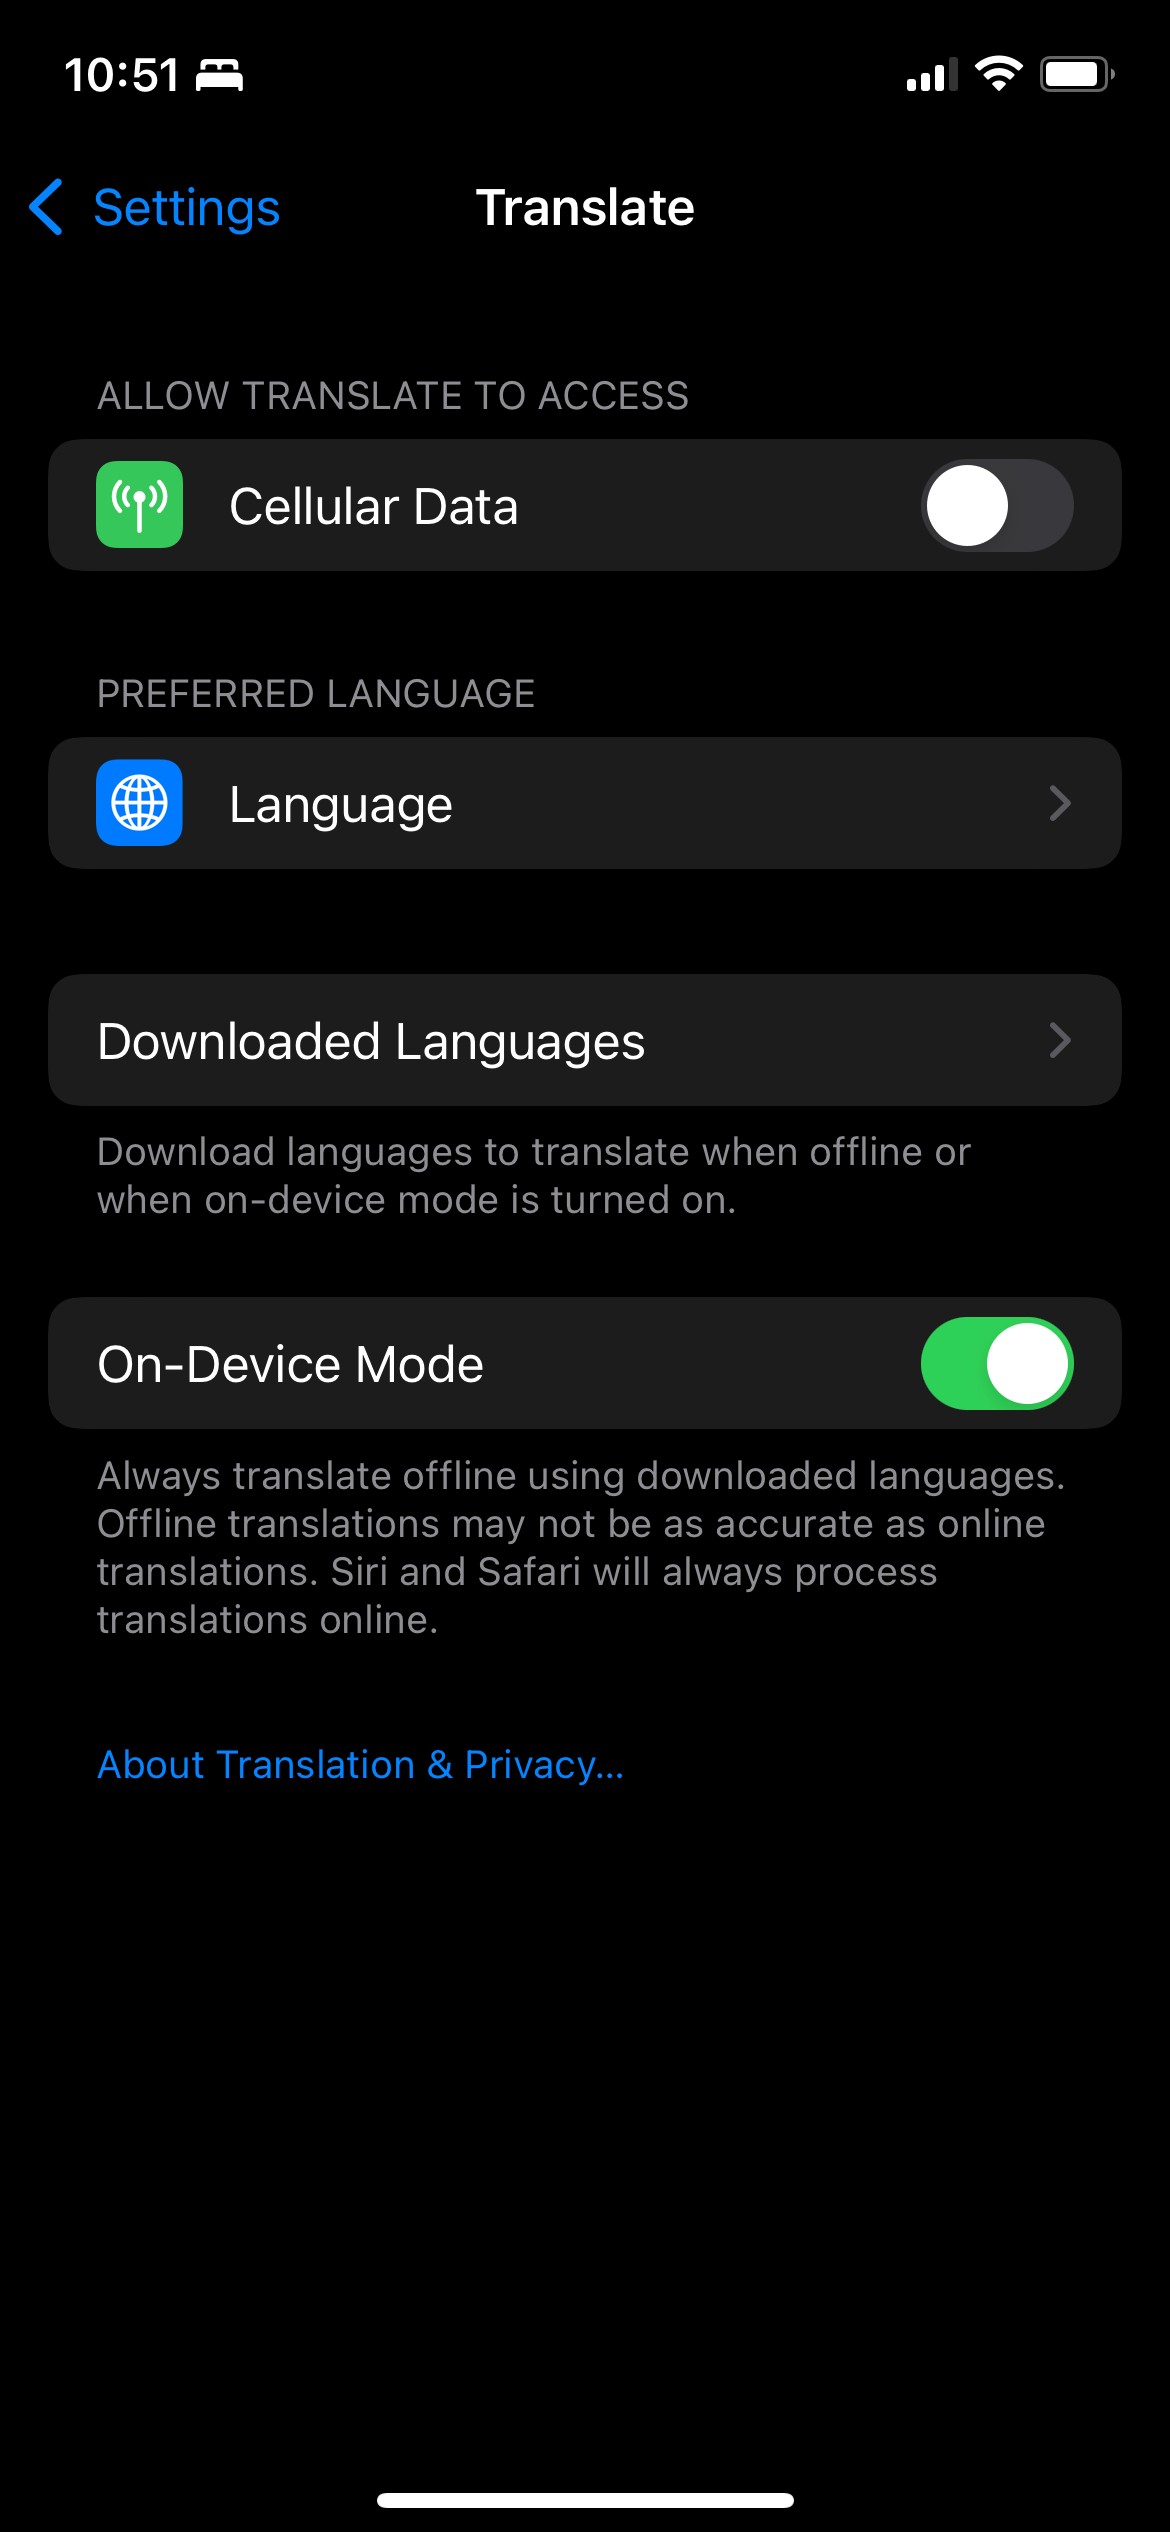 On-Device Mode on iPhone's Translate App